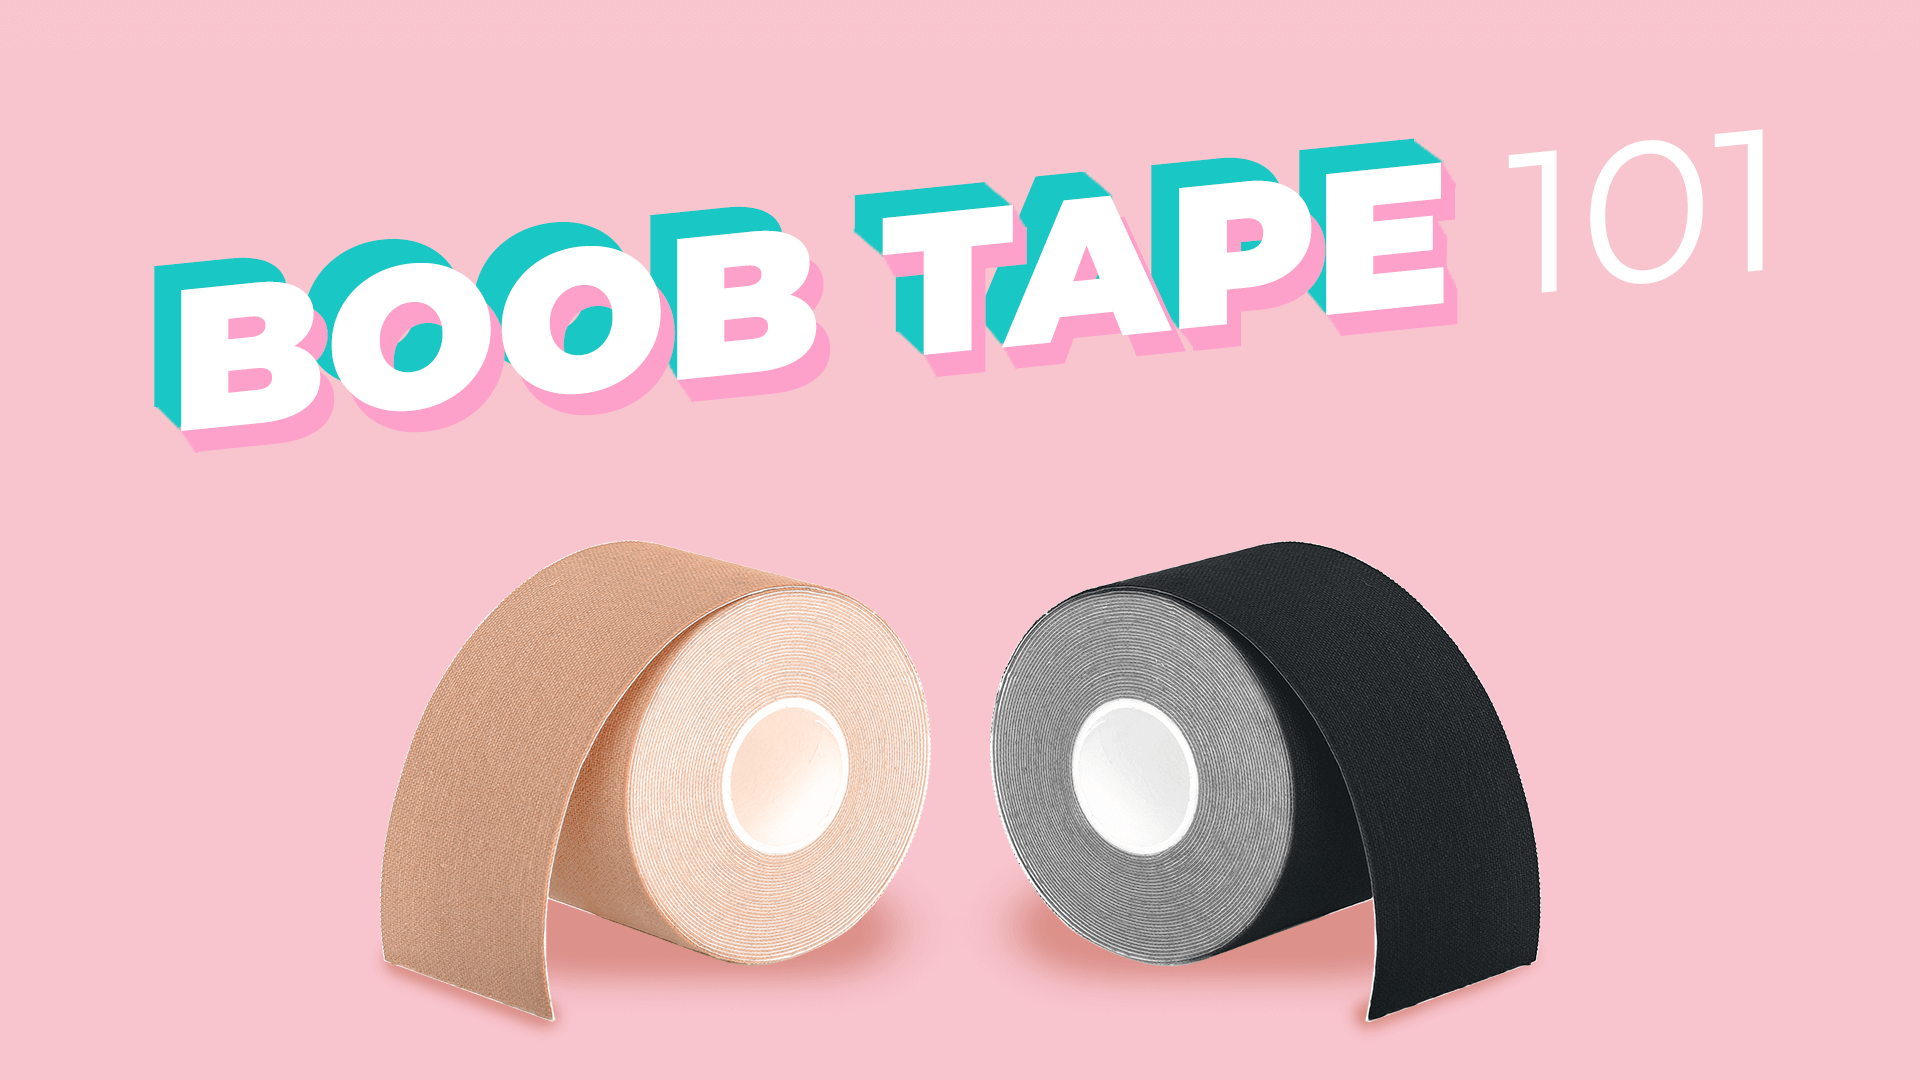 Complete Guide To Hollywood Fashion Tape